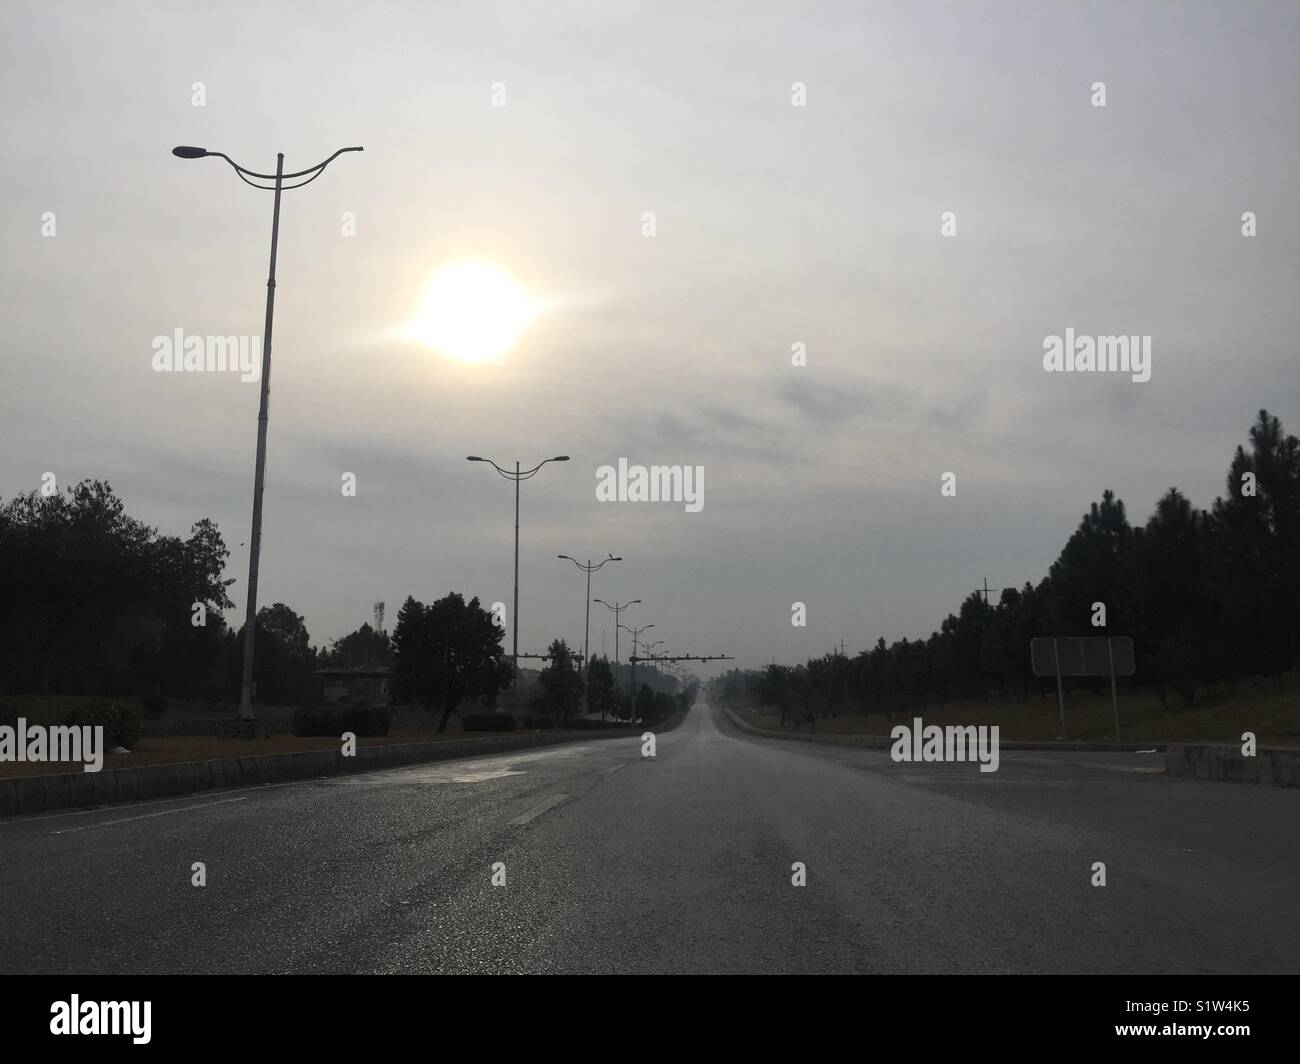 This is sun shining view on road of Islamabad. Stock Photo